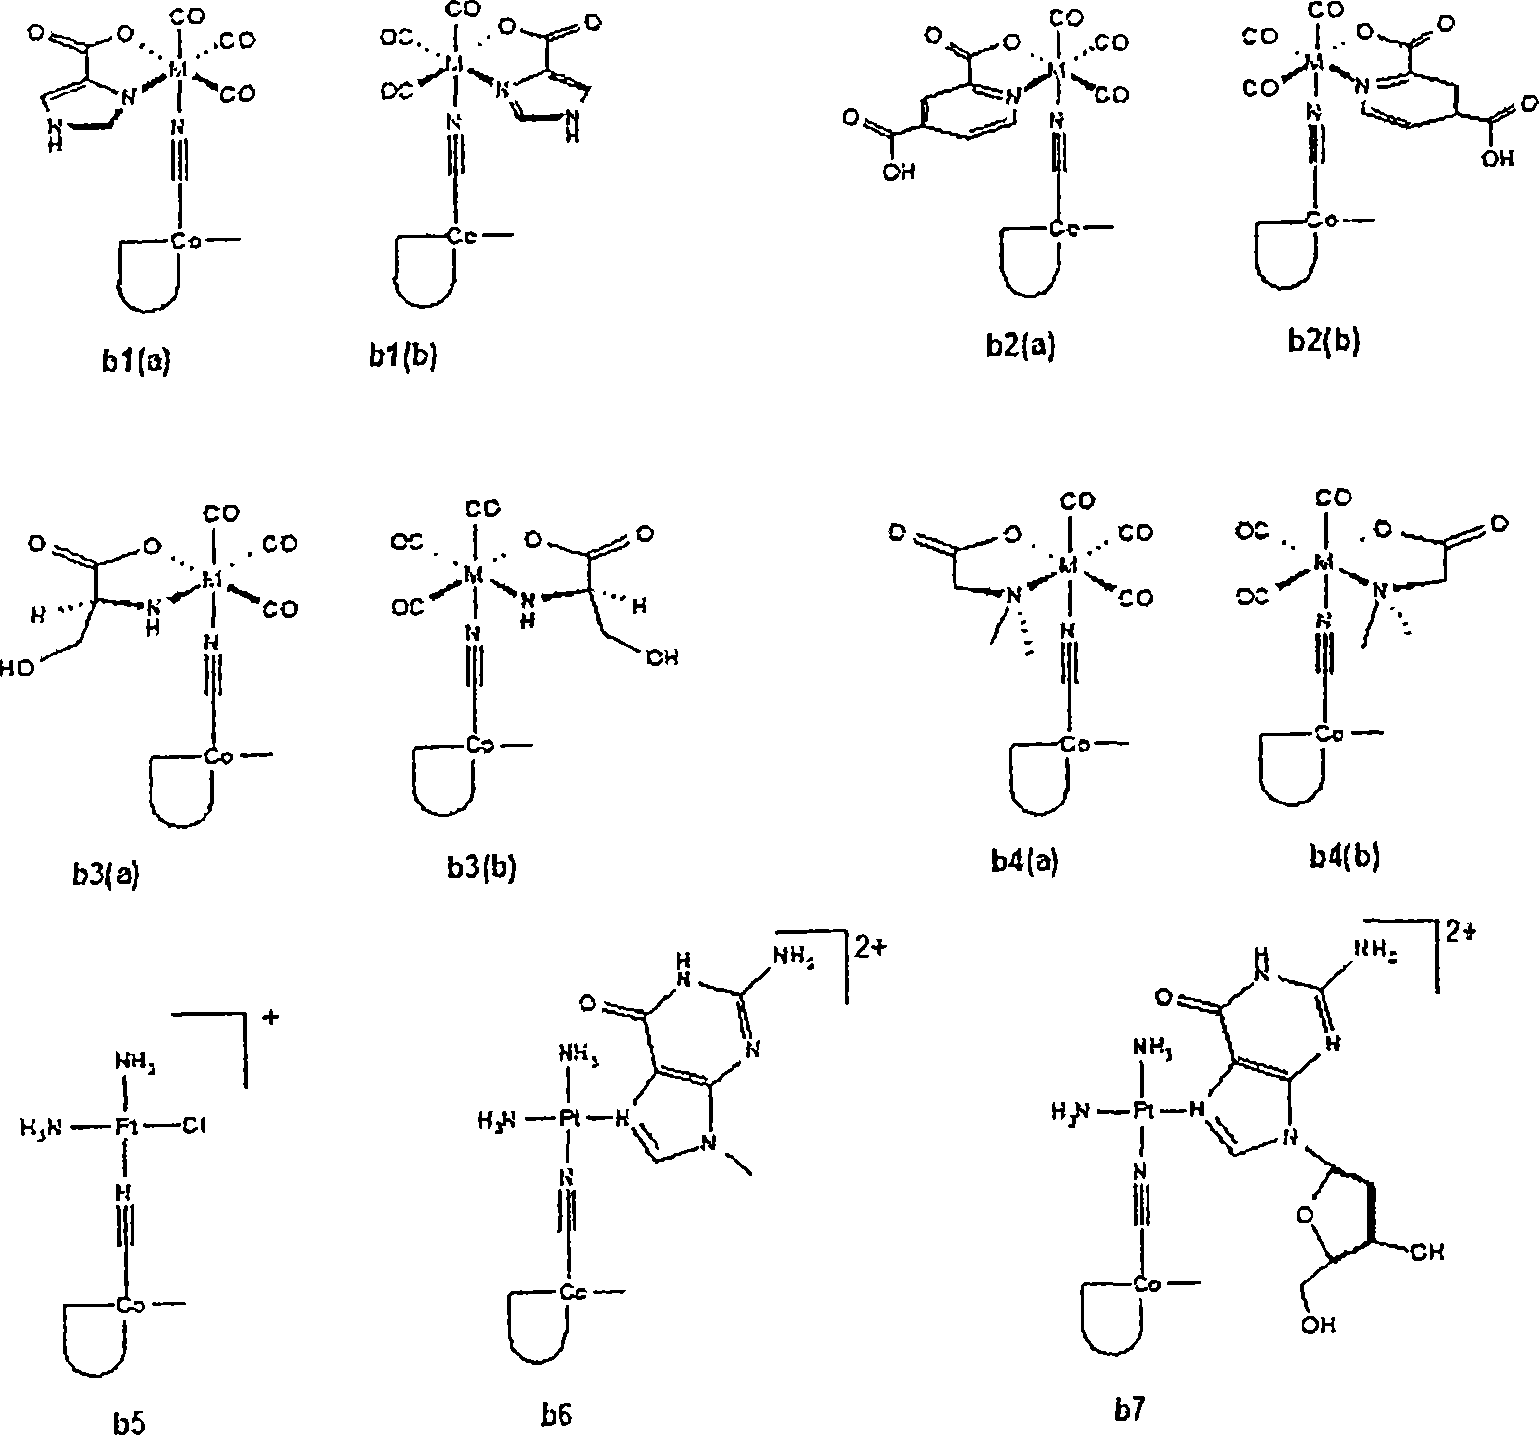 Metal complexes having vitamin B12 as a ligand